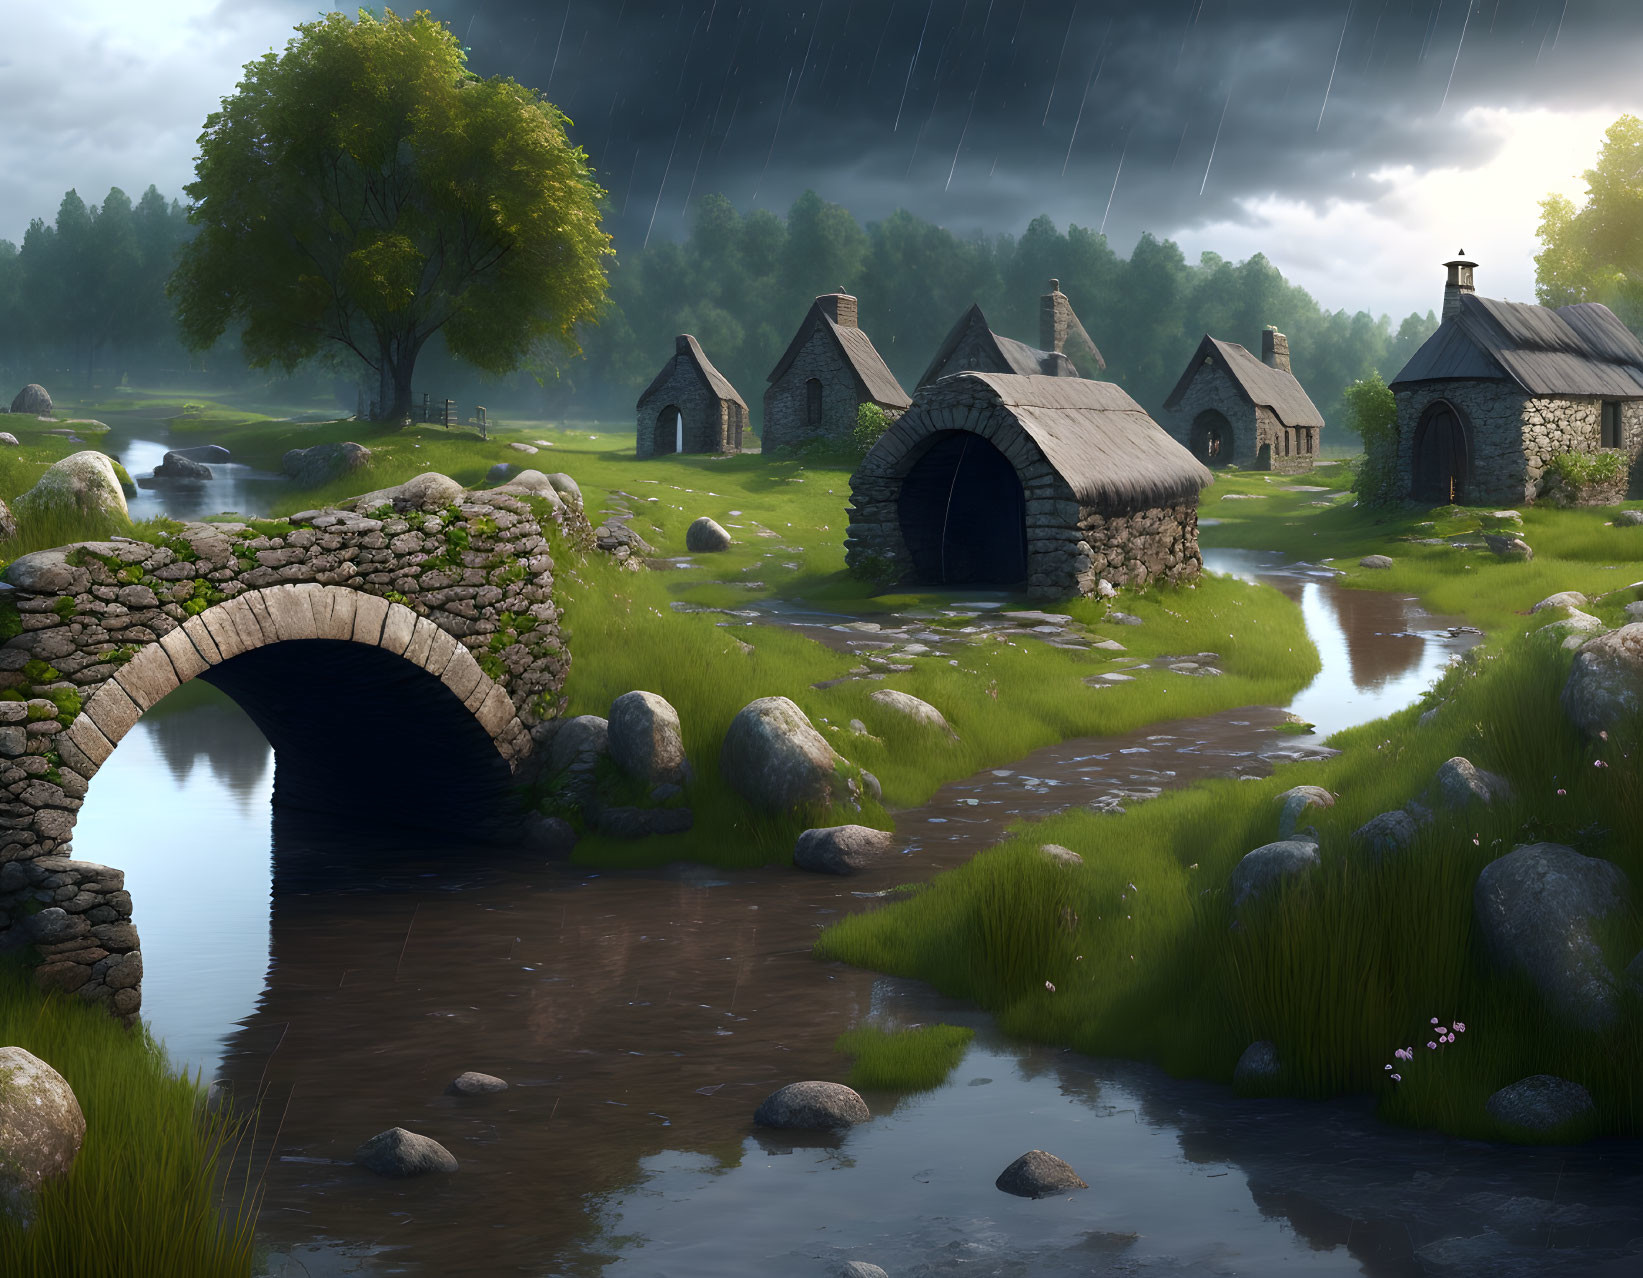 Tranquil rain-soaked landscape with stone bridge, cottages, greenery, and brooding